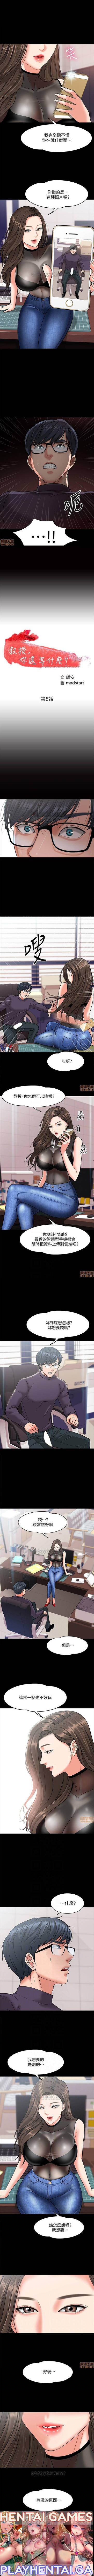 Bribe PROFESSOR, ARE YOU JUST GOING TO LOOK AT ME? | DESIRE SWAMP | 教授，你還等什麼? Ch. 5 [Chinese] Manhwa Tesao - Page 2